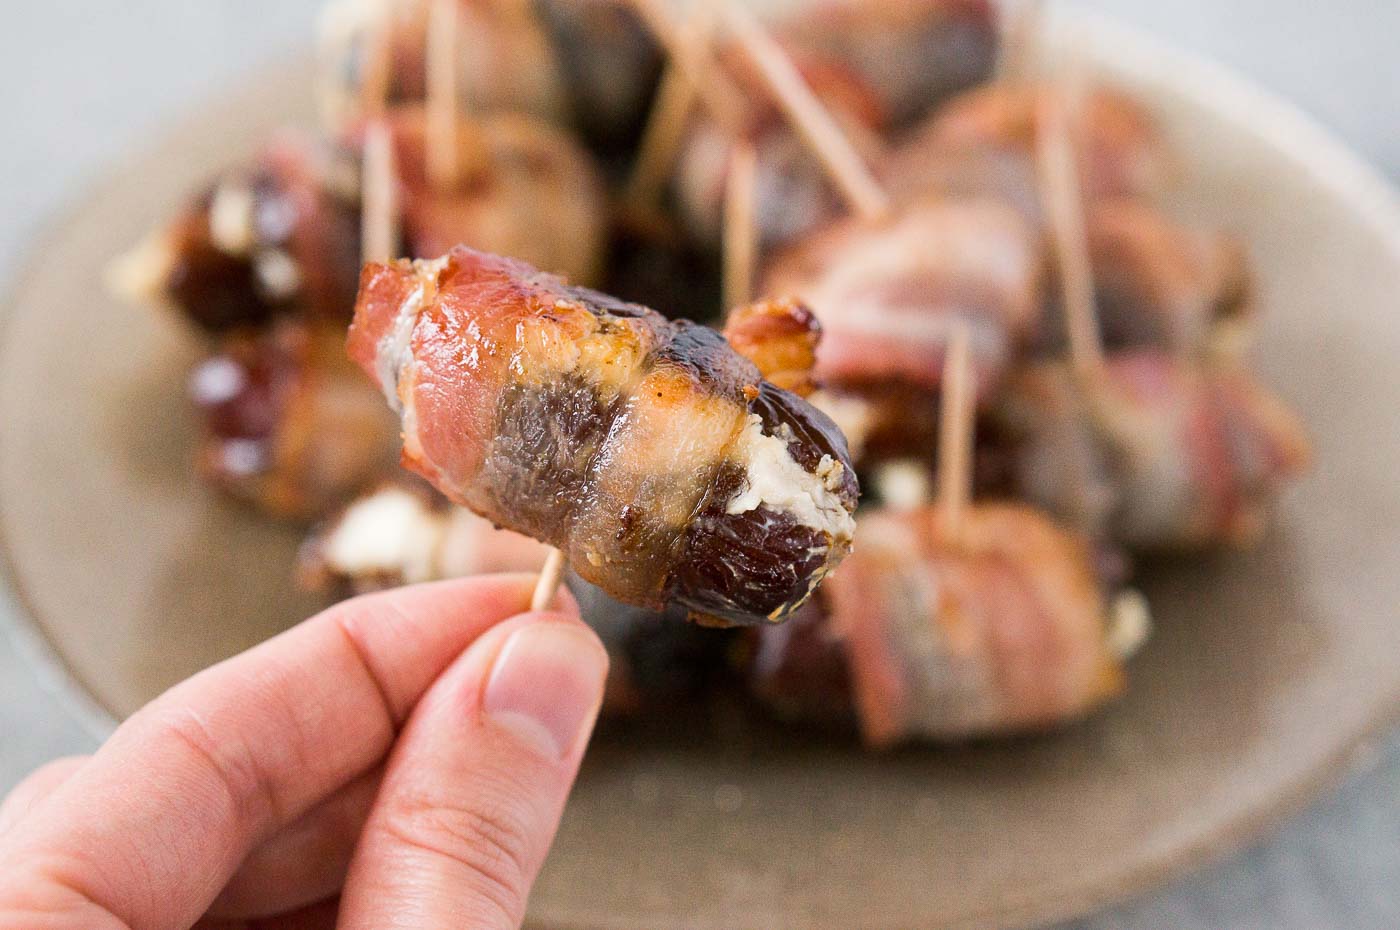 holding bacon wrapped dates with goat cheese